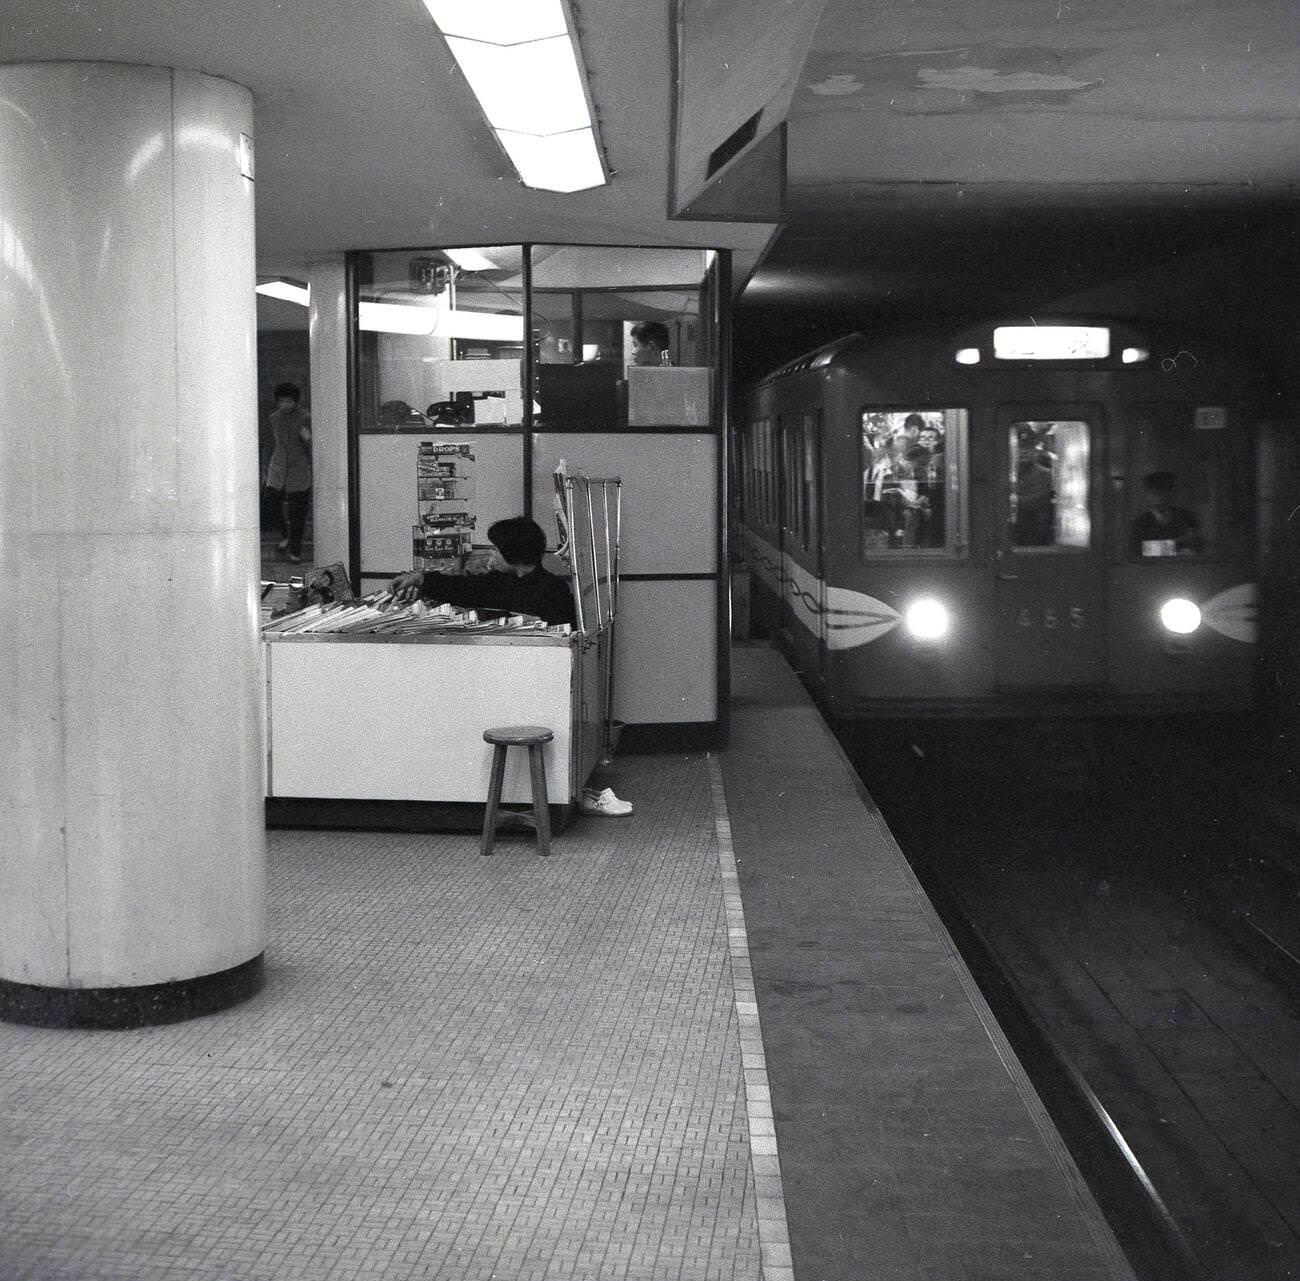 A Tokyo metro train pulling into a station, 1950s.